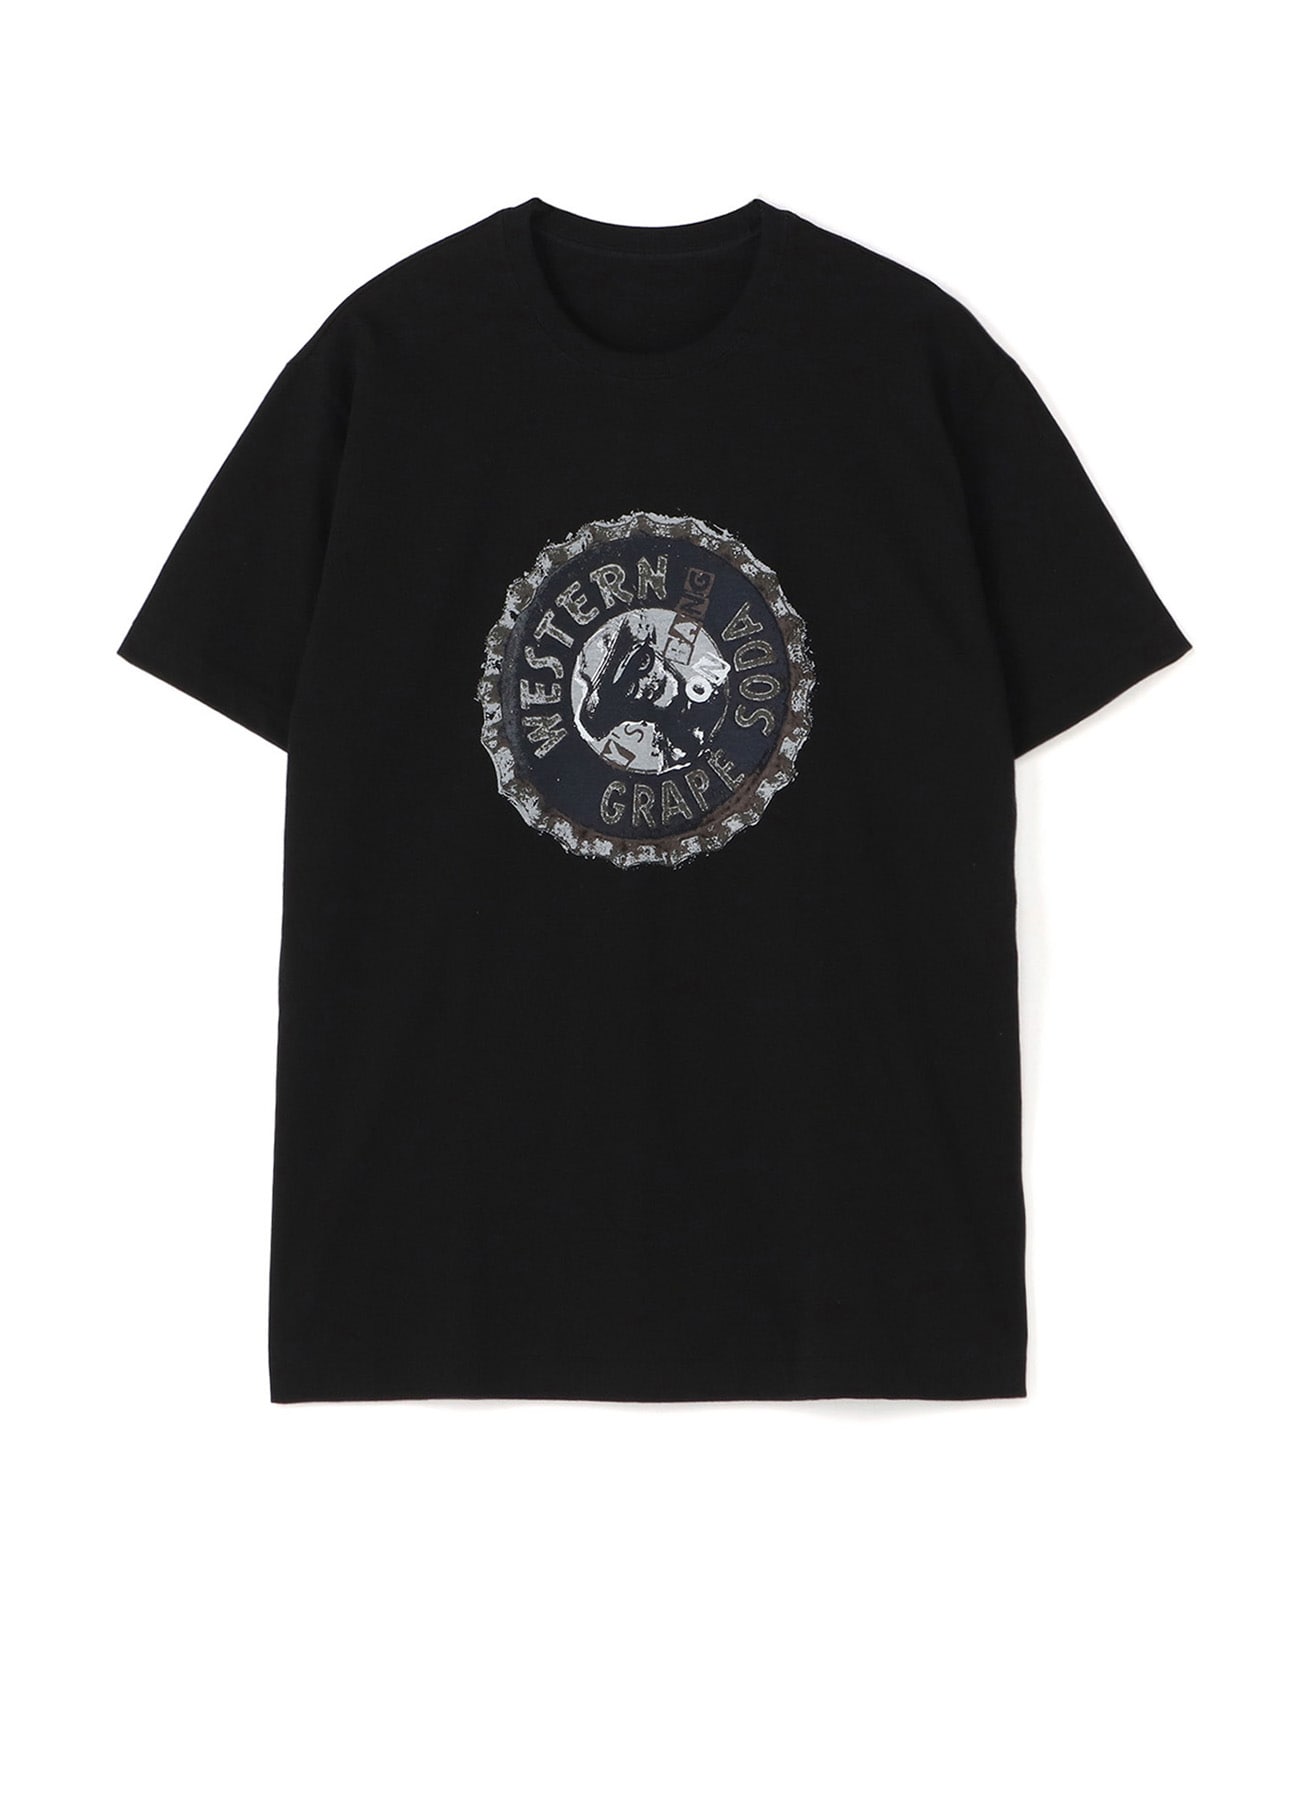 Y's BANG ON! CROWN T-SHIRT WESTERN(FREE SIZE Black): Vintage｜THE 